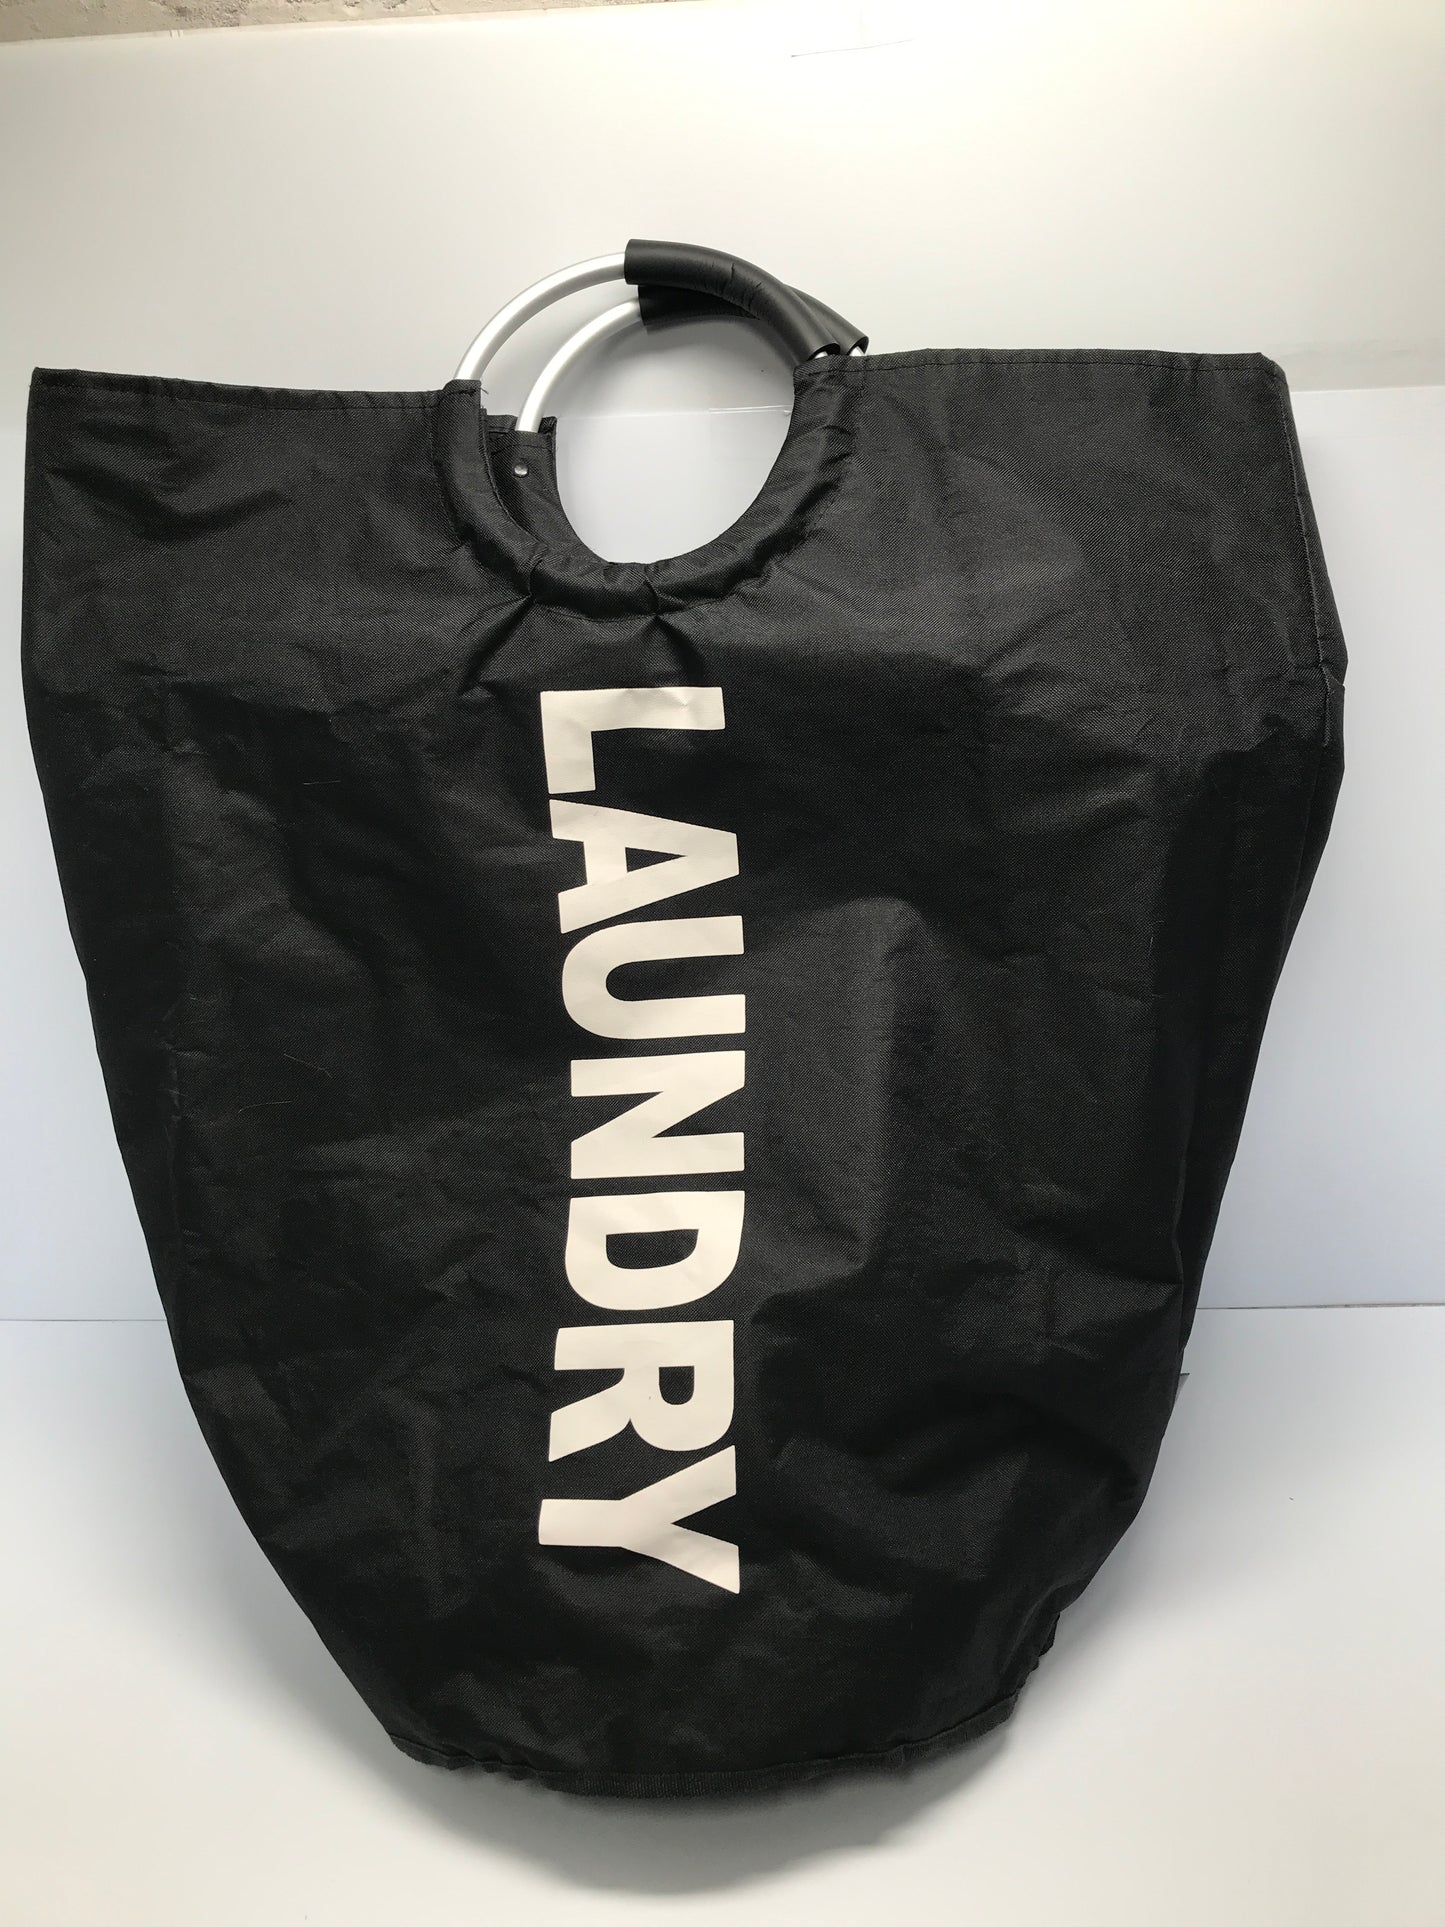 New Large Laundry Bag 28x22in With Handle